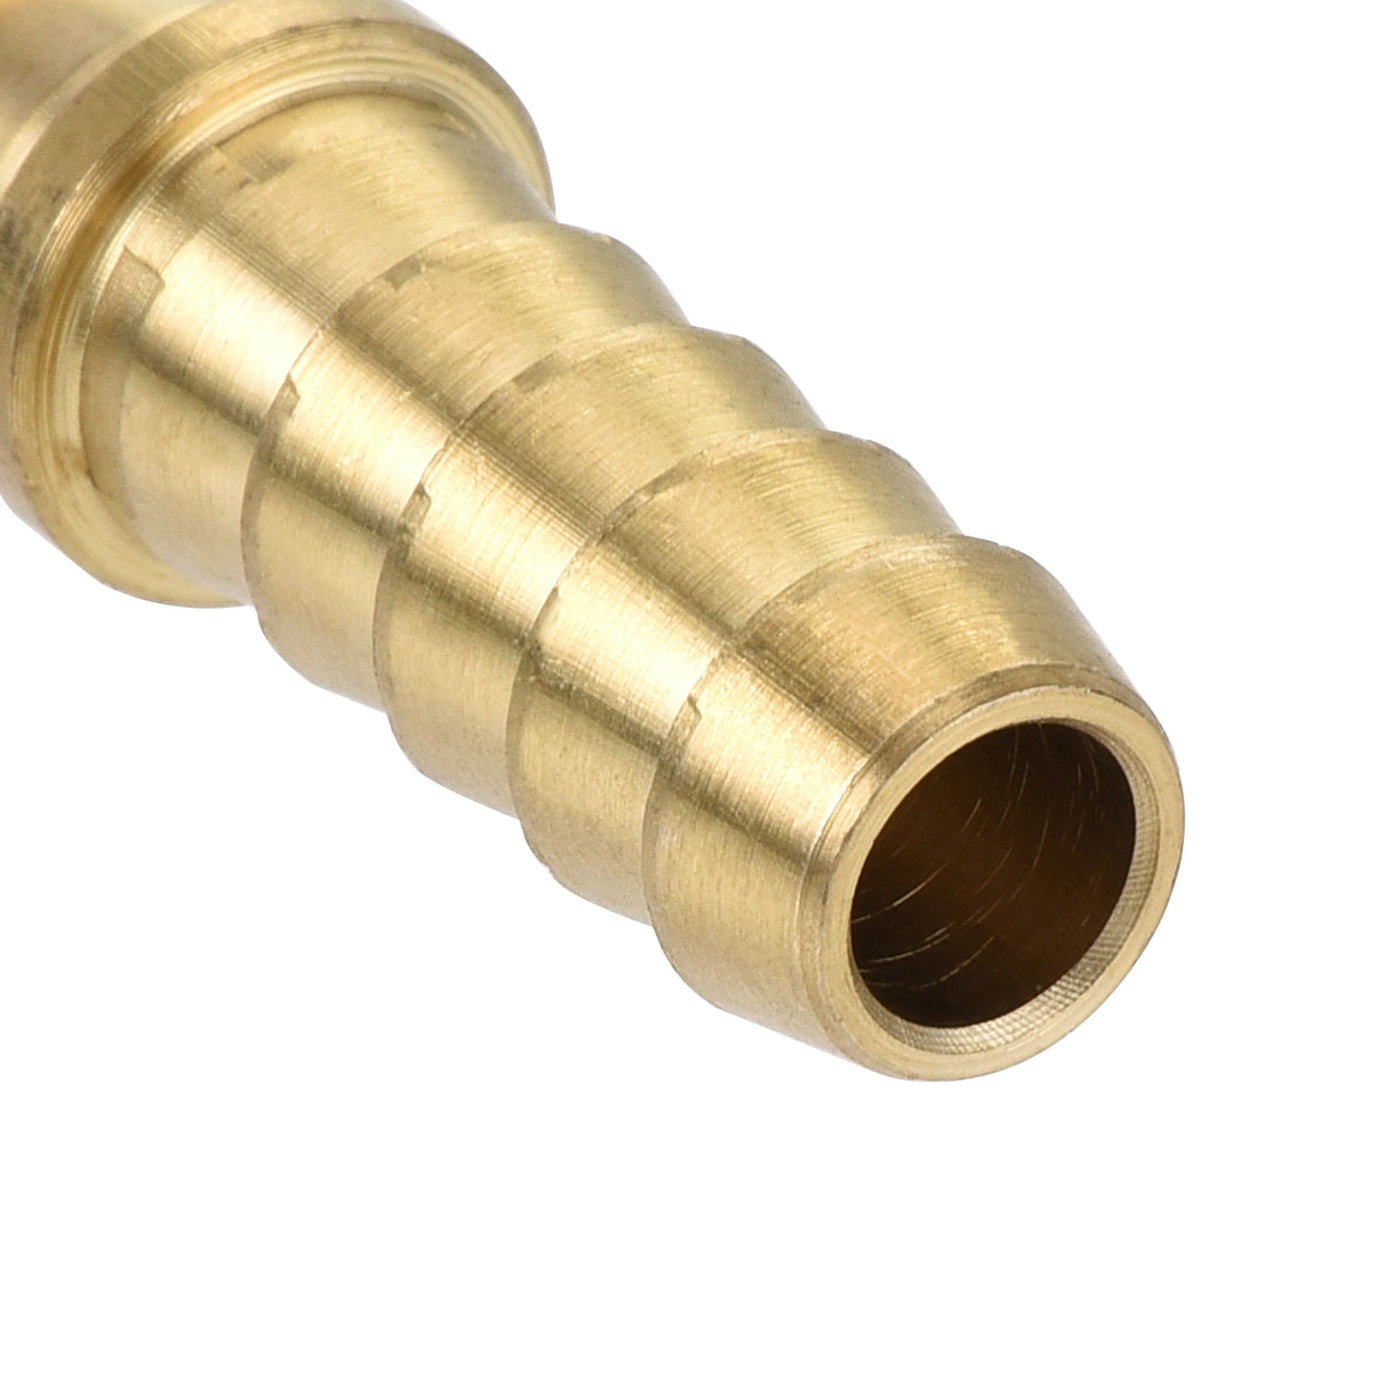 uxcell Uxcell Hose Barb Fitting, 5/16x5/16inch Brass Hollow Straight Quick Connector for Water Fuel Air Oil Gas, Pack of 2